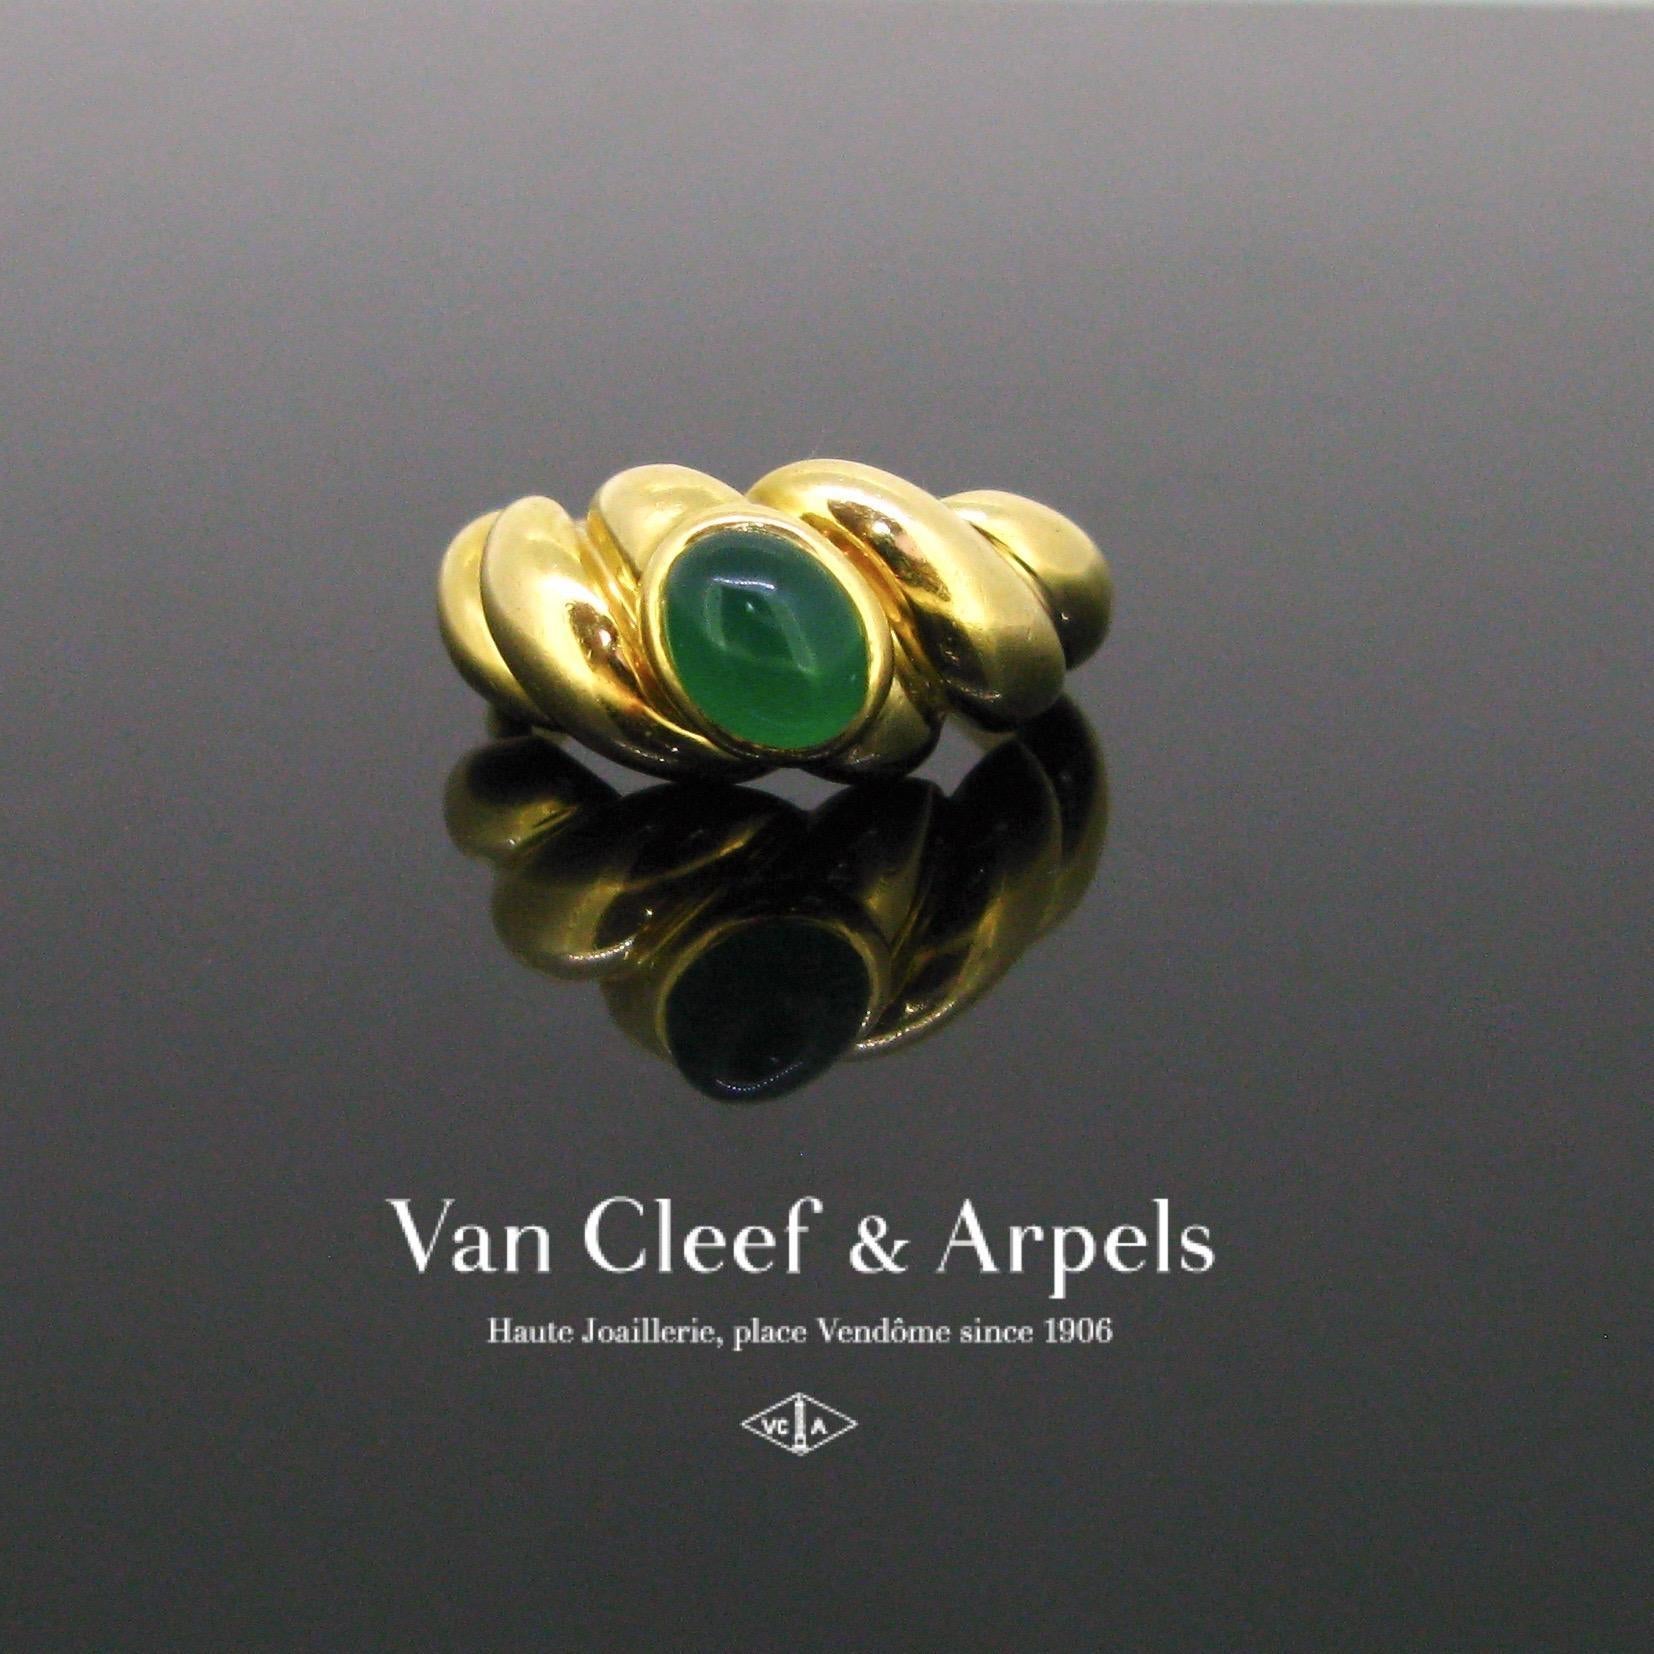 Weight:	6,2gr

Metal:	18kt yellow gold

Stones:	1 Chrysoprase
•	Cut:	Cabochon
•	Dimensions:	7.90x 6 x 3.93mm

Condition:	Very Good

Hallmarks:	French, eagle’s head

Signature:	Van Cleef & Arpels, nºB5520 C215

Comments:	This beautiful ring is signed